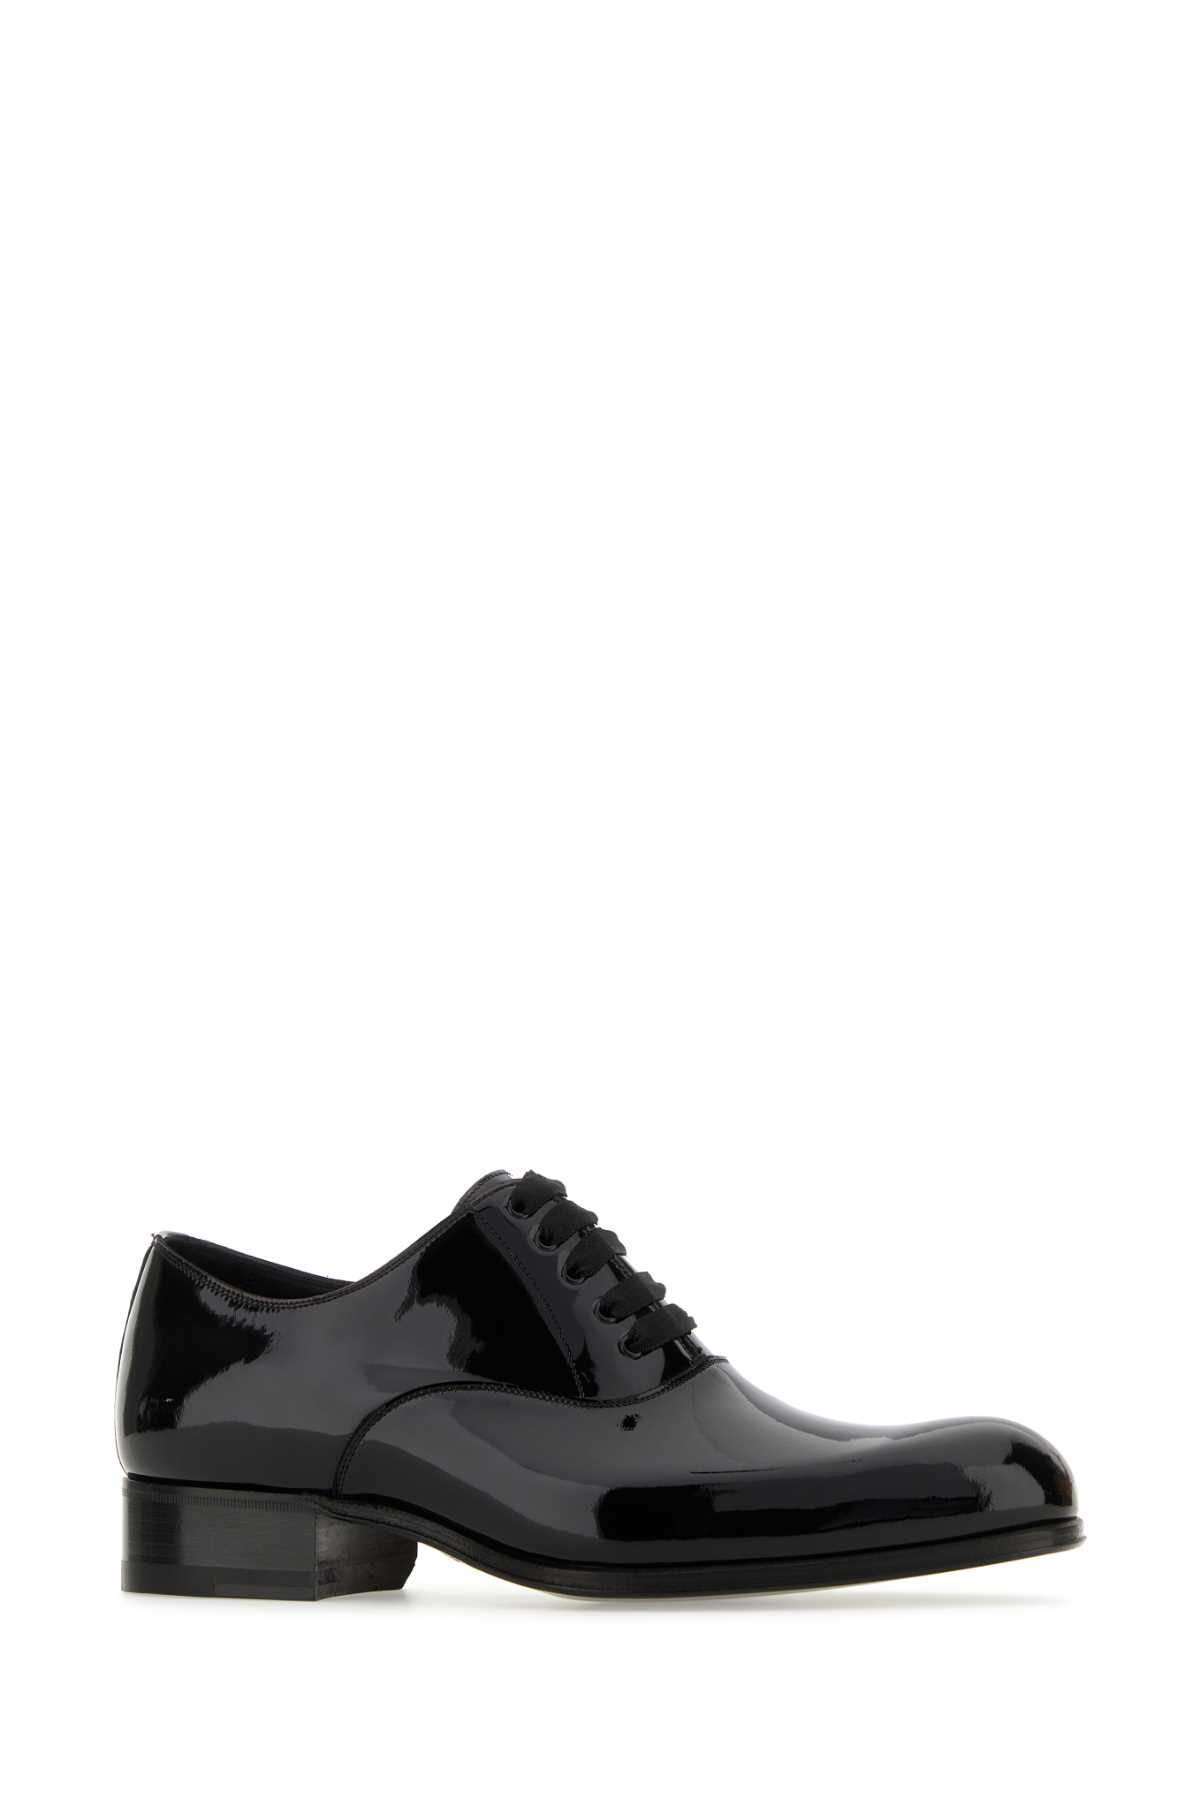 TOM FORD BLACK LEATHER EDGAR LACE-UP SHOES